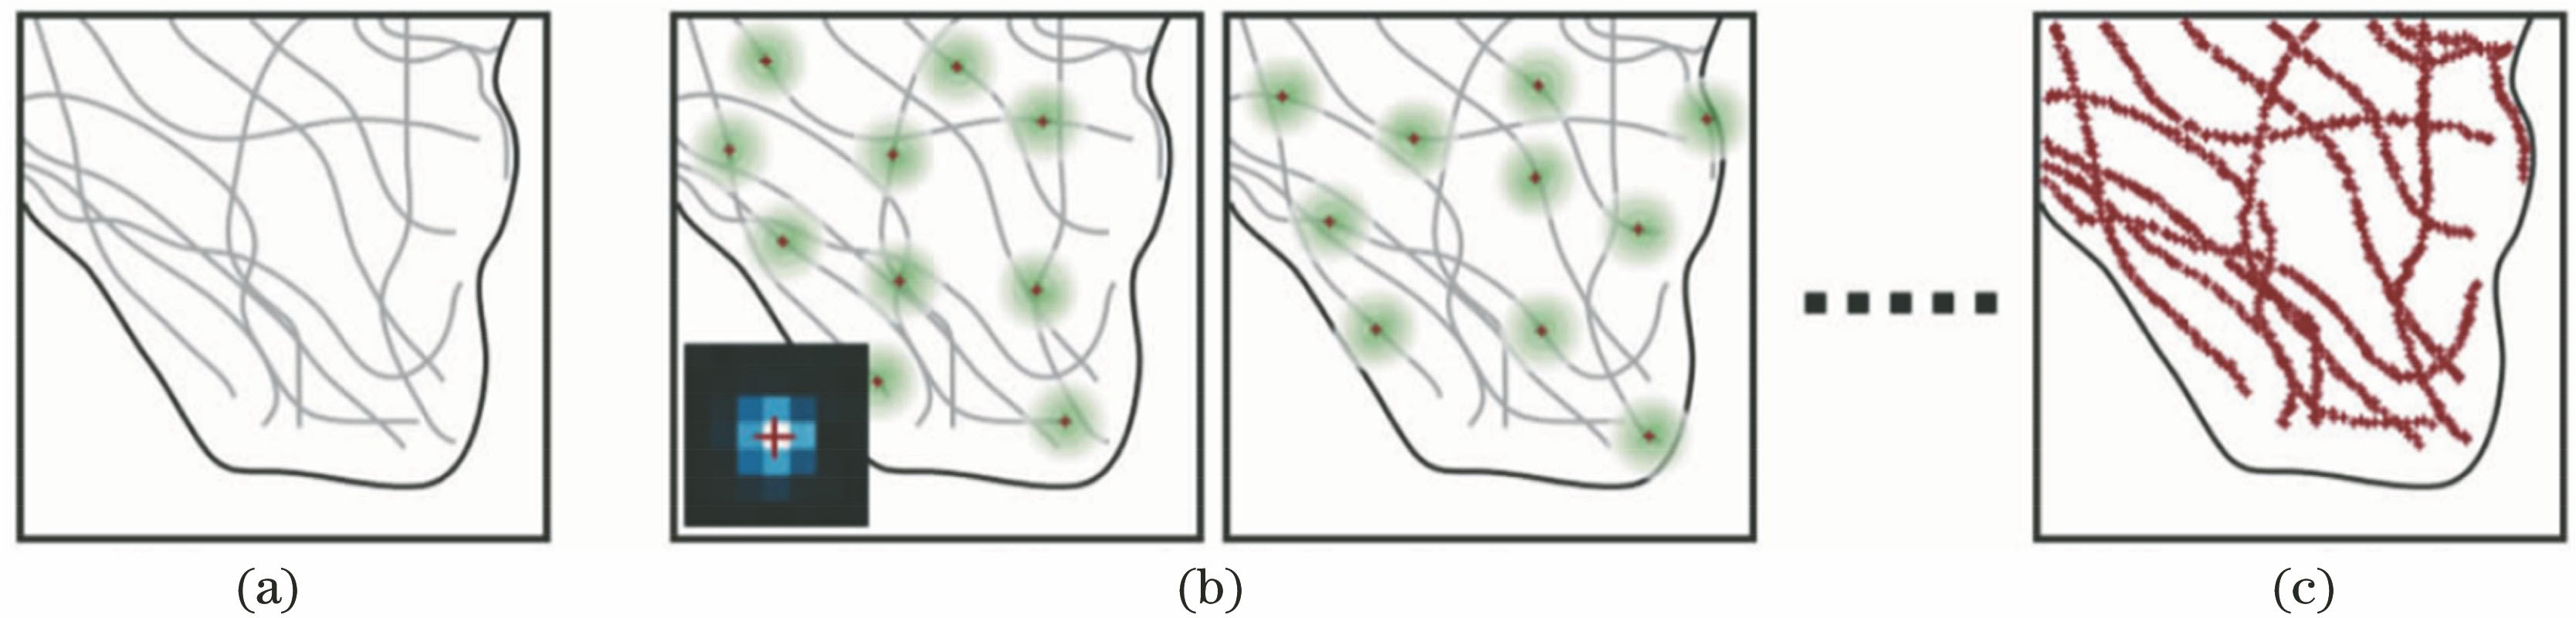 Principle of stochastic optical reconstruction microscopy (STORM), photoactivated localization microscopy (PALM), and fluorescence photoactivation localization microscopy (FPALM)[13]. (a) Target structure; (b) localization of activated probes; (c) super-resolution image